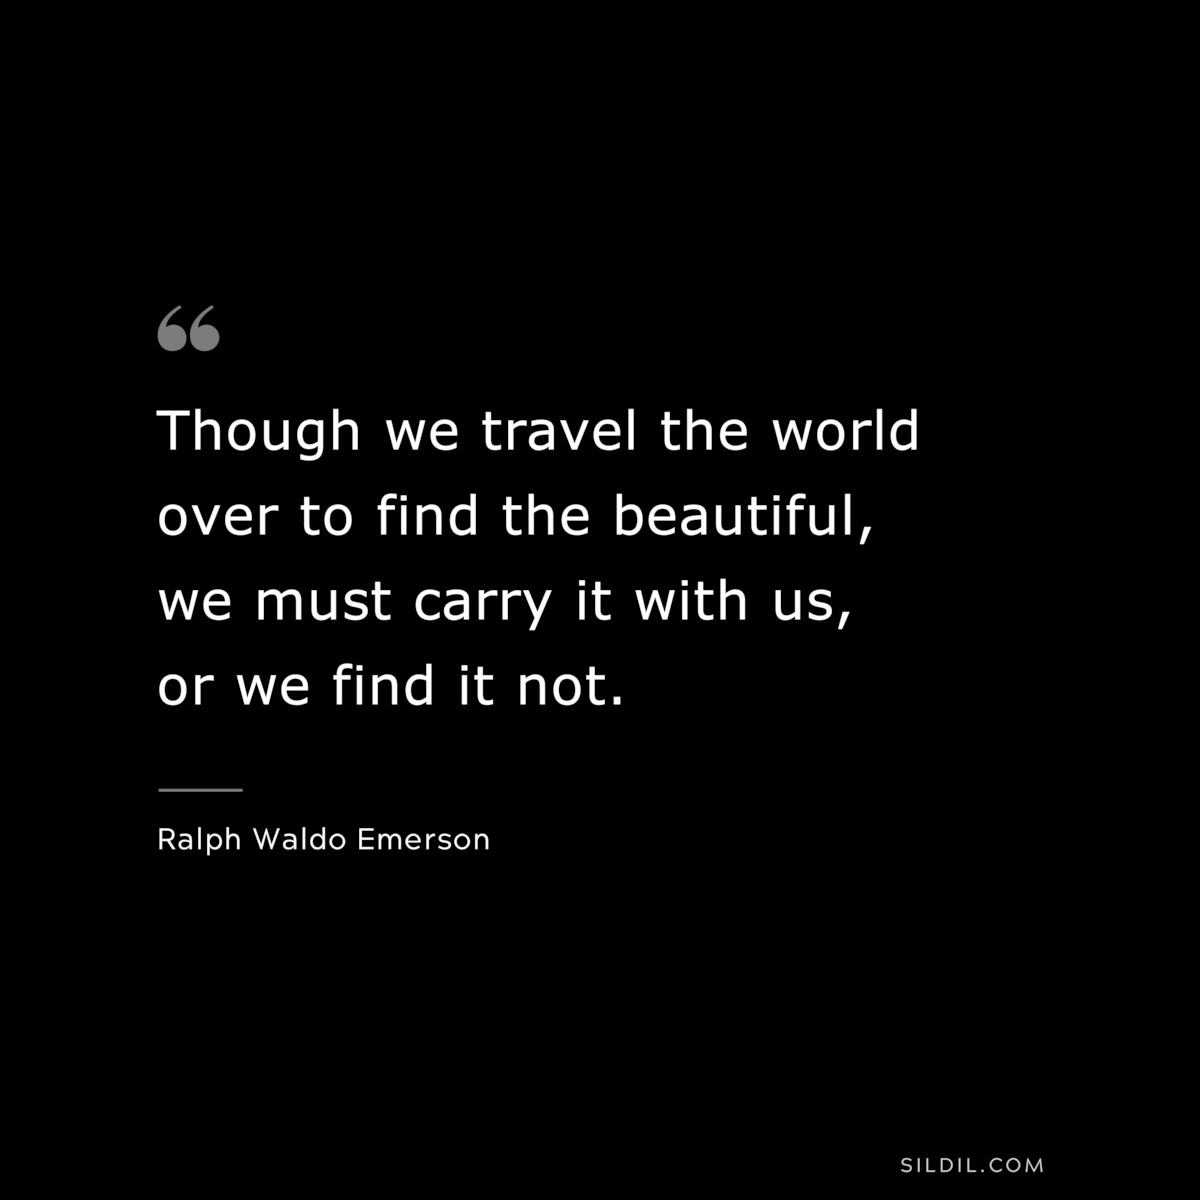 Though we travel the world over to find the beautiful, we must carry it with us, or we find it not. — Ralph Waldo Emerson